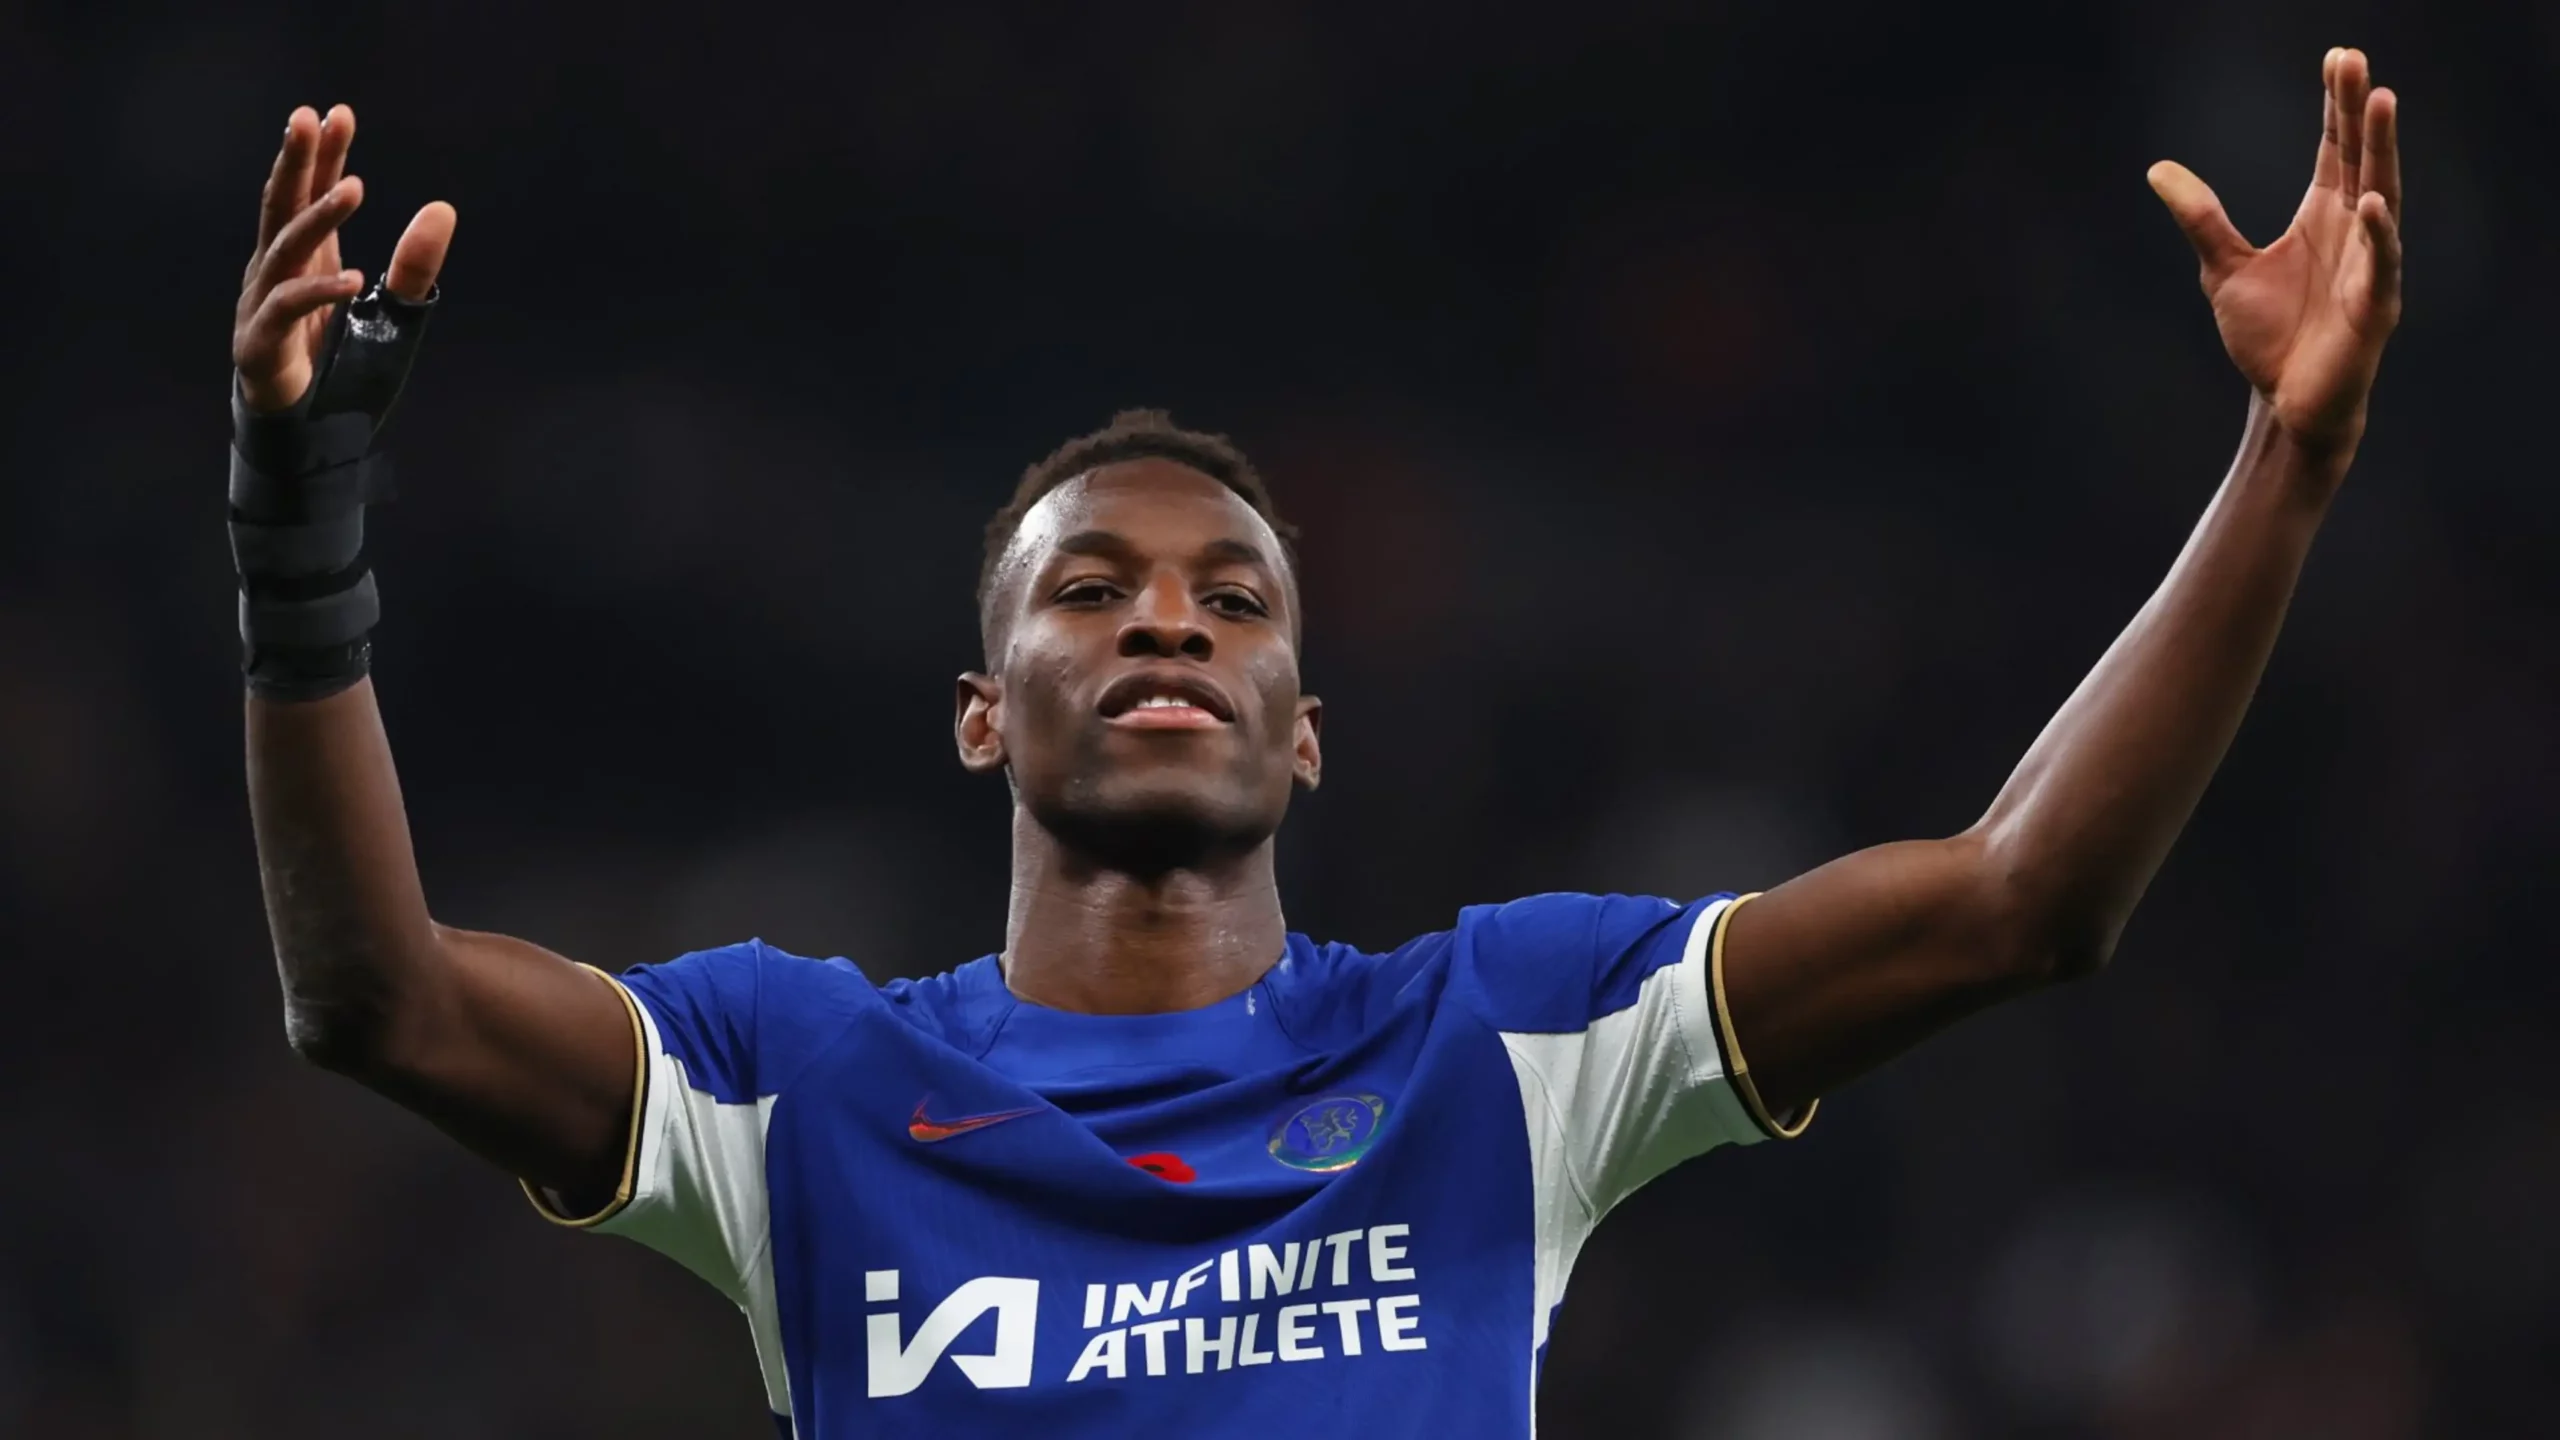 Ian Wright backs Nicolas Jackson, telling Chelsea fans to be patient with the £30 million signing, saying, "This guy has got something."